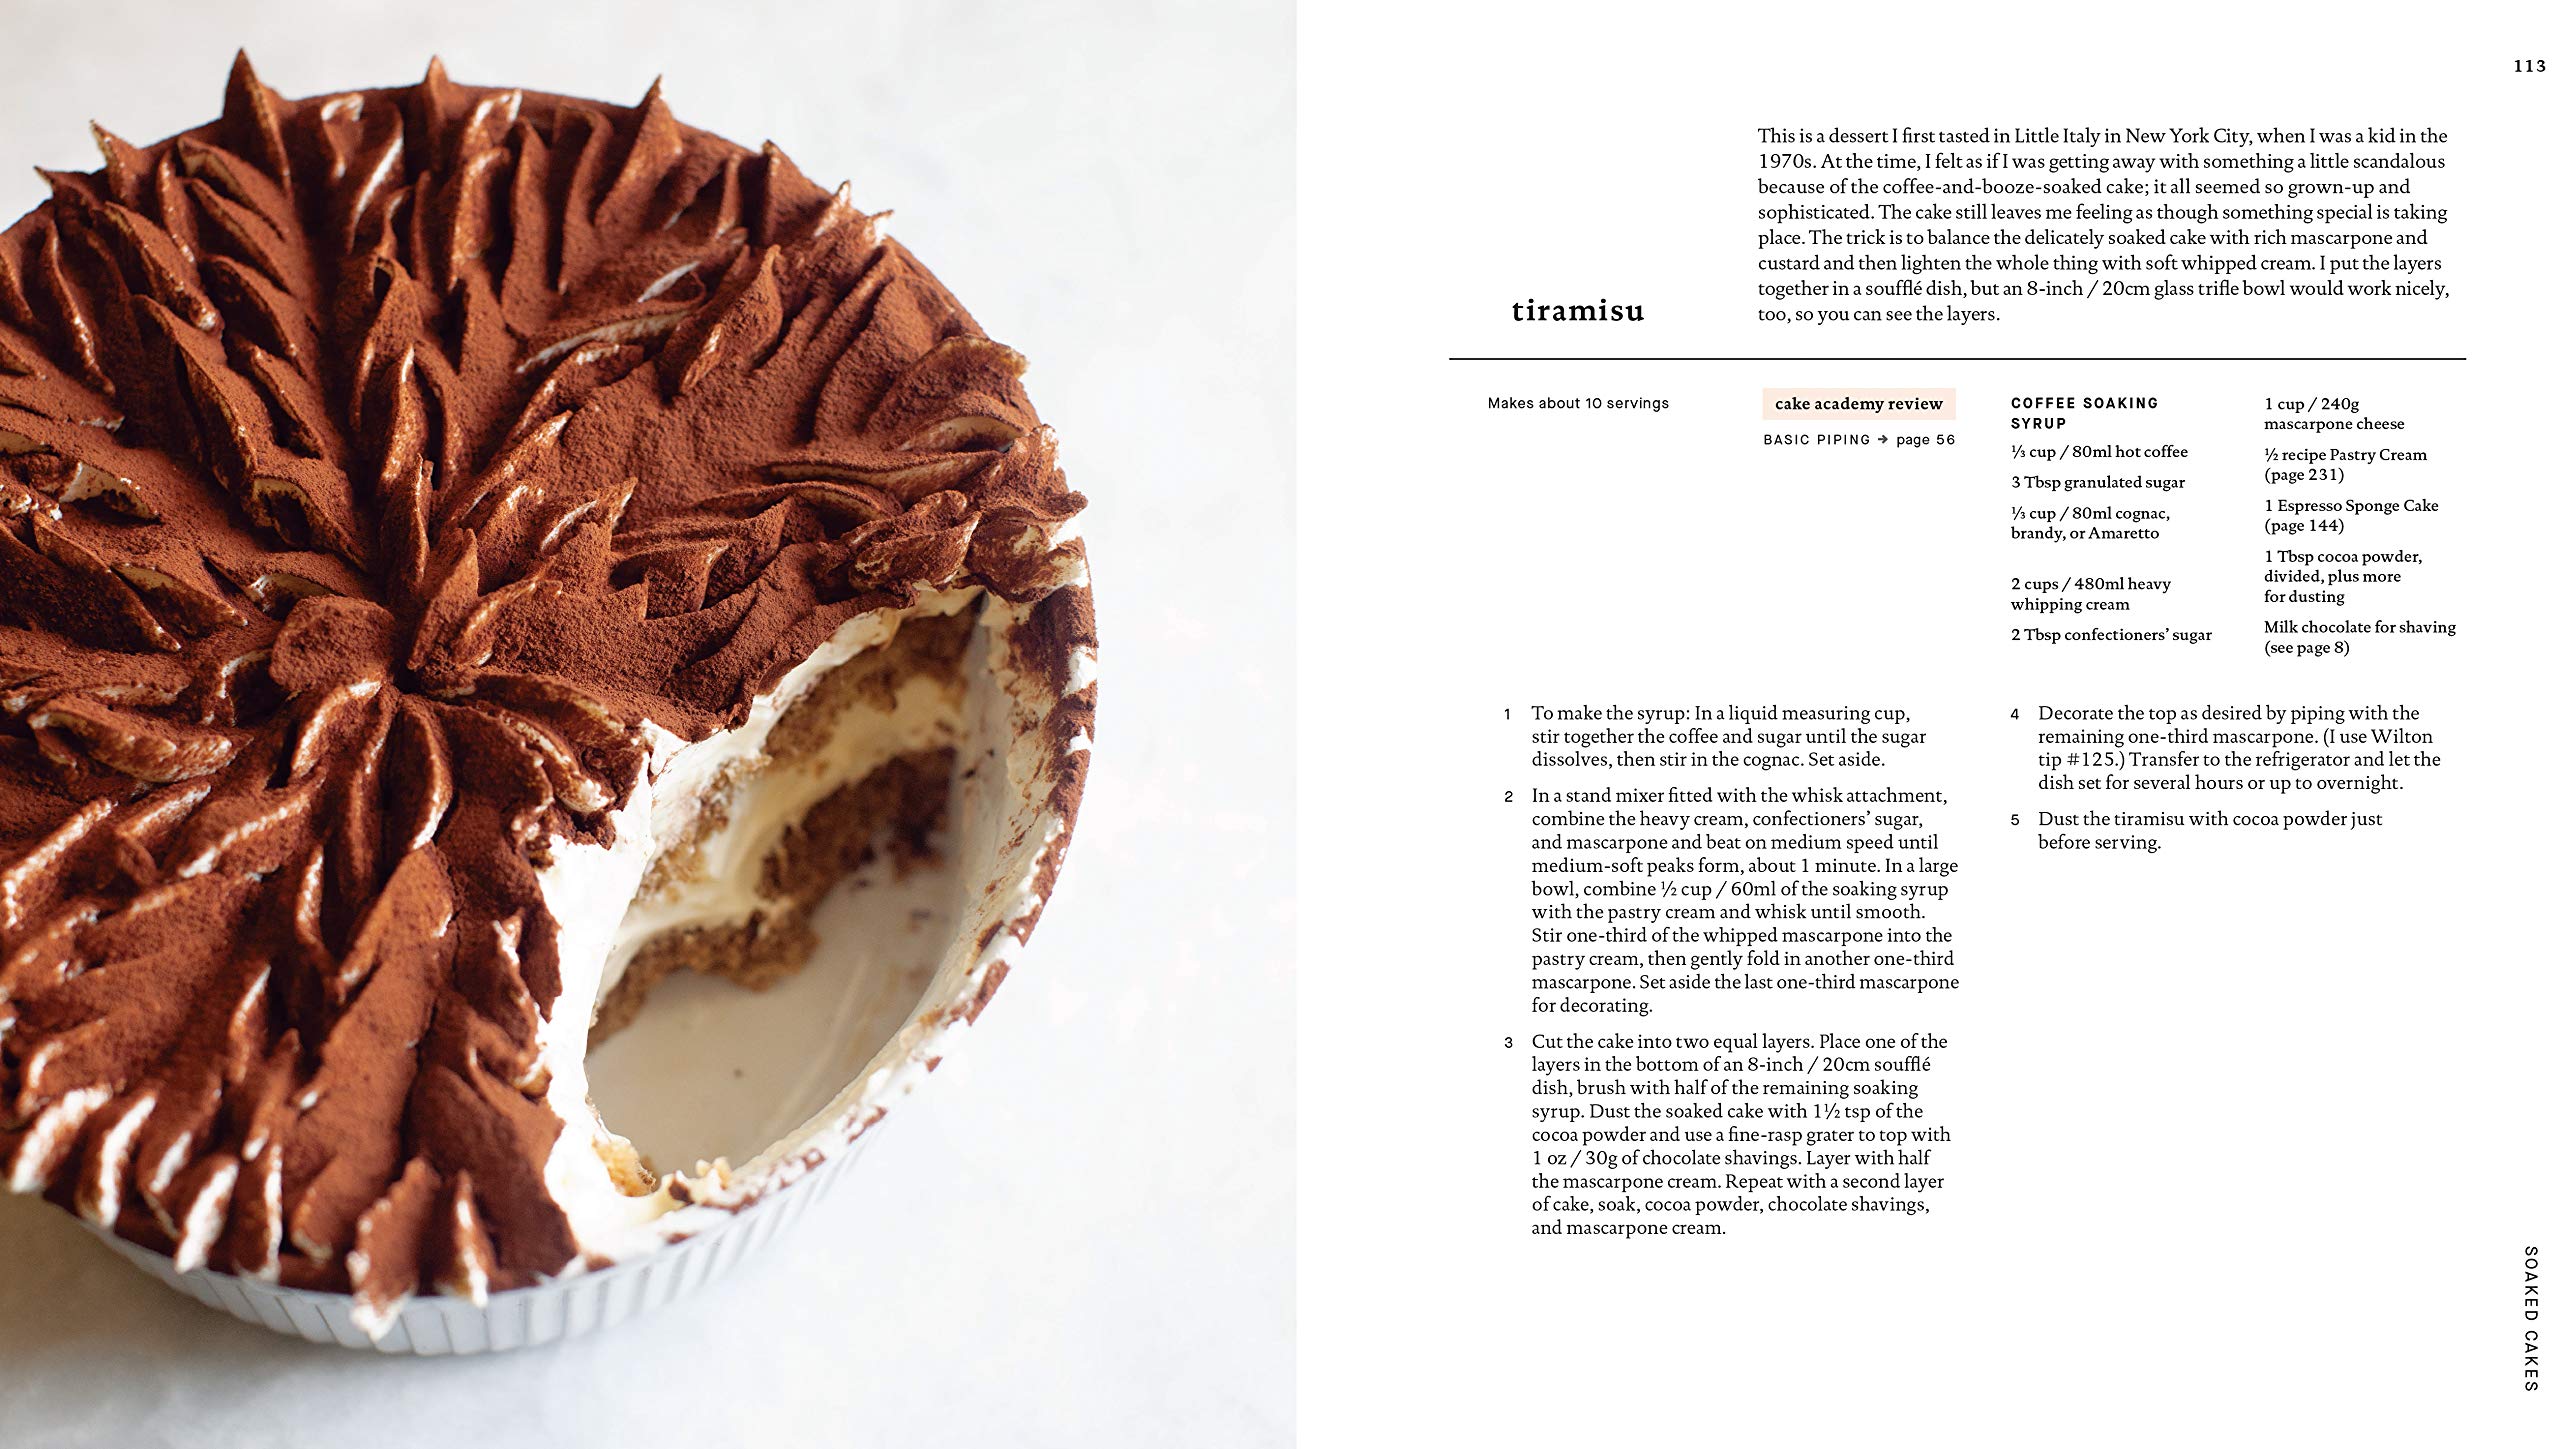 Zoe Bakes Cakes: Everything You Need to Know to Make Your Favorite Layers, Bundts, Loaves, and More (Zoe Francois) *Signed*